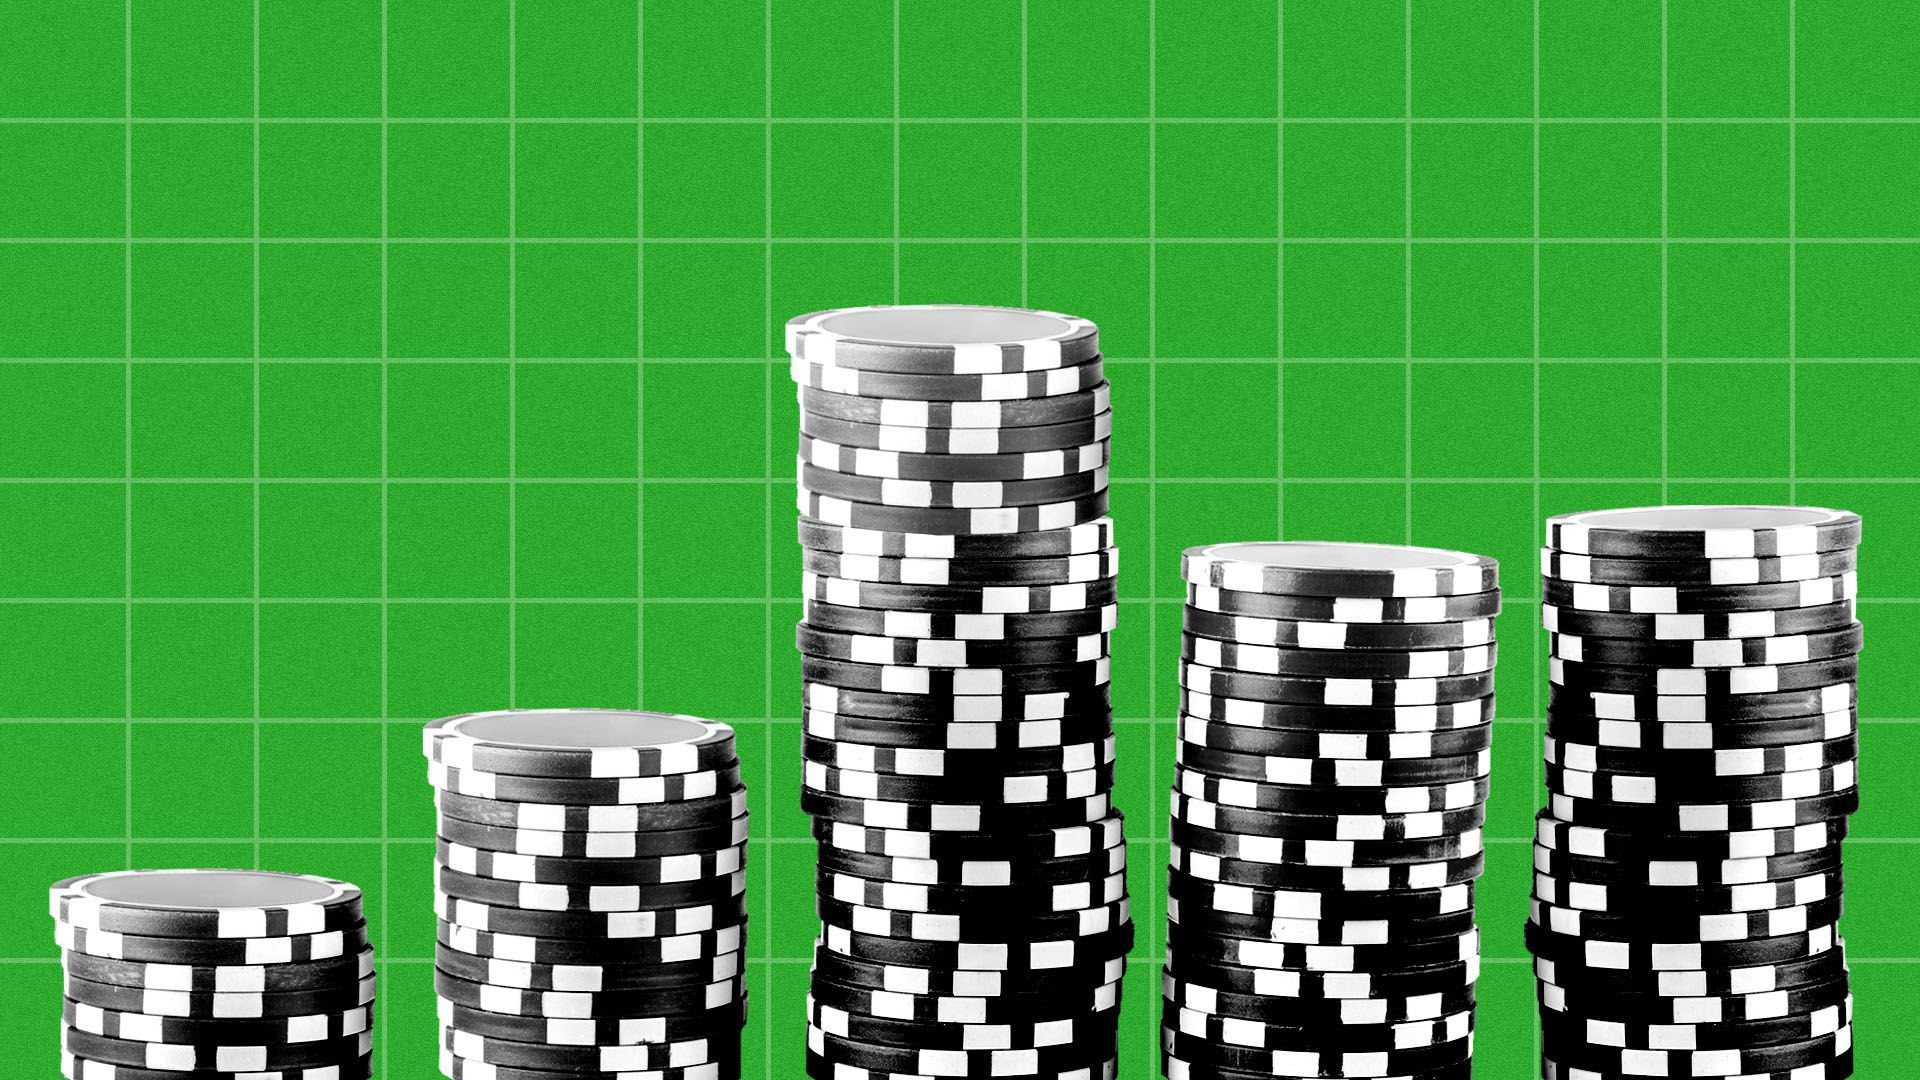 Illustration of piles of gambling chips arranged as a bar graph